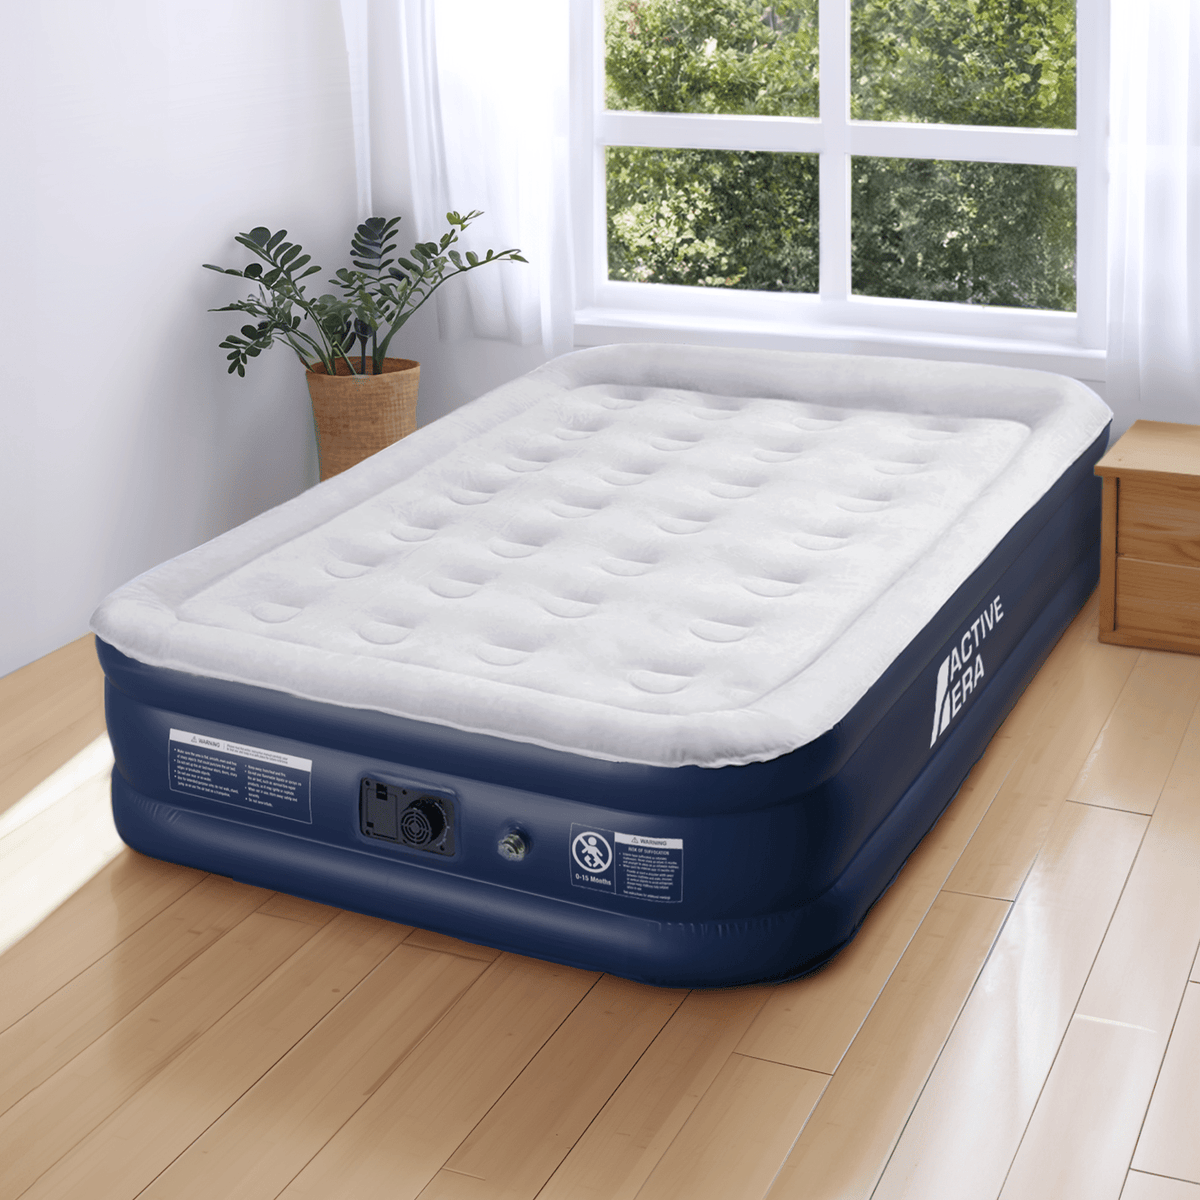 Double Size Comfort Air Bed – Grey/Navy